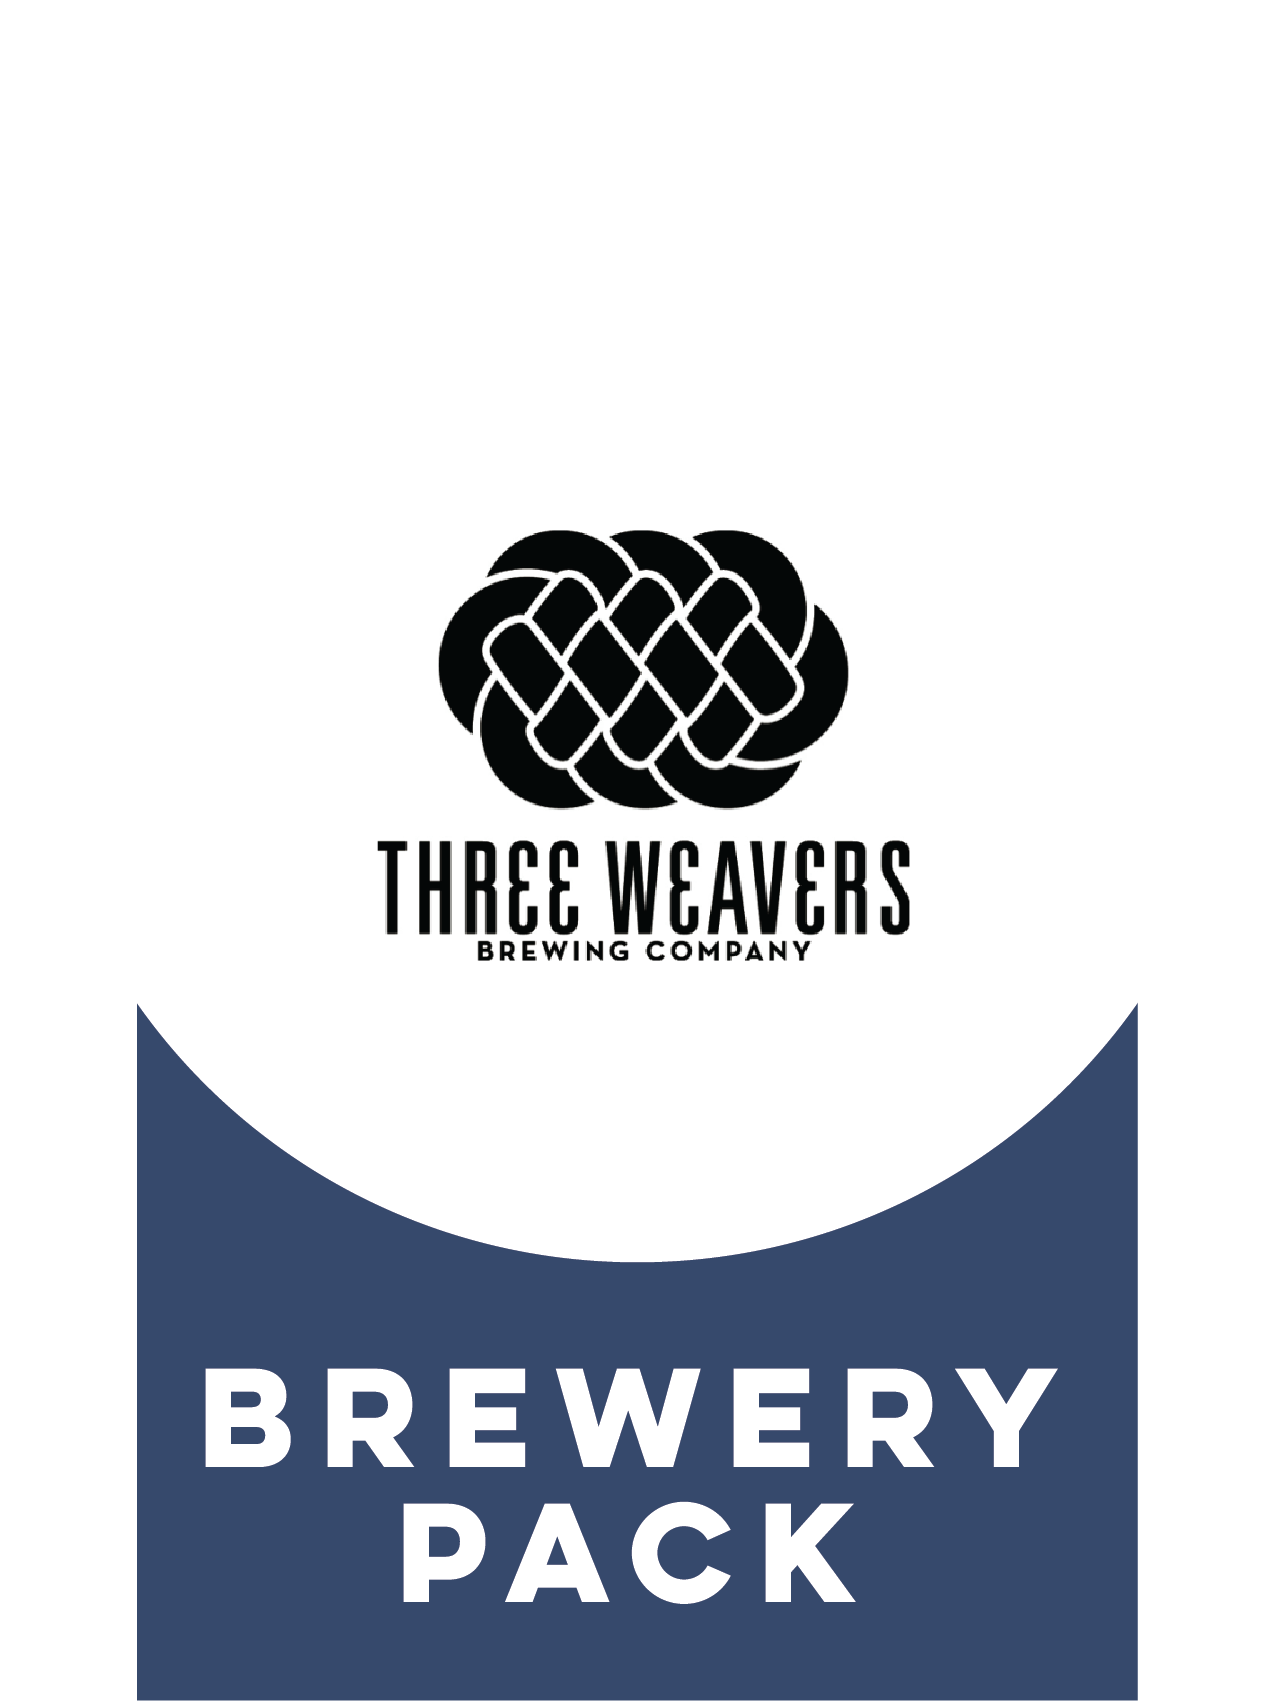 -Three Weavers- Three Weavers Brewery Pack-Packs & Cases- Only @ Beer Republic - The best online beer store for American & Canadian craft beer - Buy beer online from the USA and Canada - Bier online kopen - Amerikaans bier kopen - Craft beer store - Craft beer kopen - Amerikanisch bier kaufen - Bier online kaufen - Acheter biere online - IPA - Stout - Porter - New England IPA - Hazy IPA - Imperial Stout - Barrel Aged - Barrel Aged Imperial Stout - Brown - Dark beer - Blond - Blonde - Pilsner - Lager - Wheat